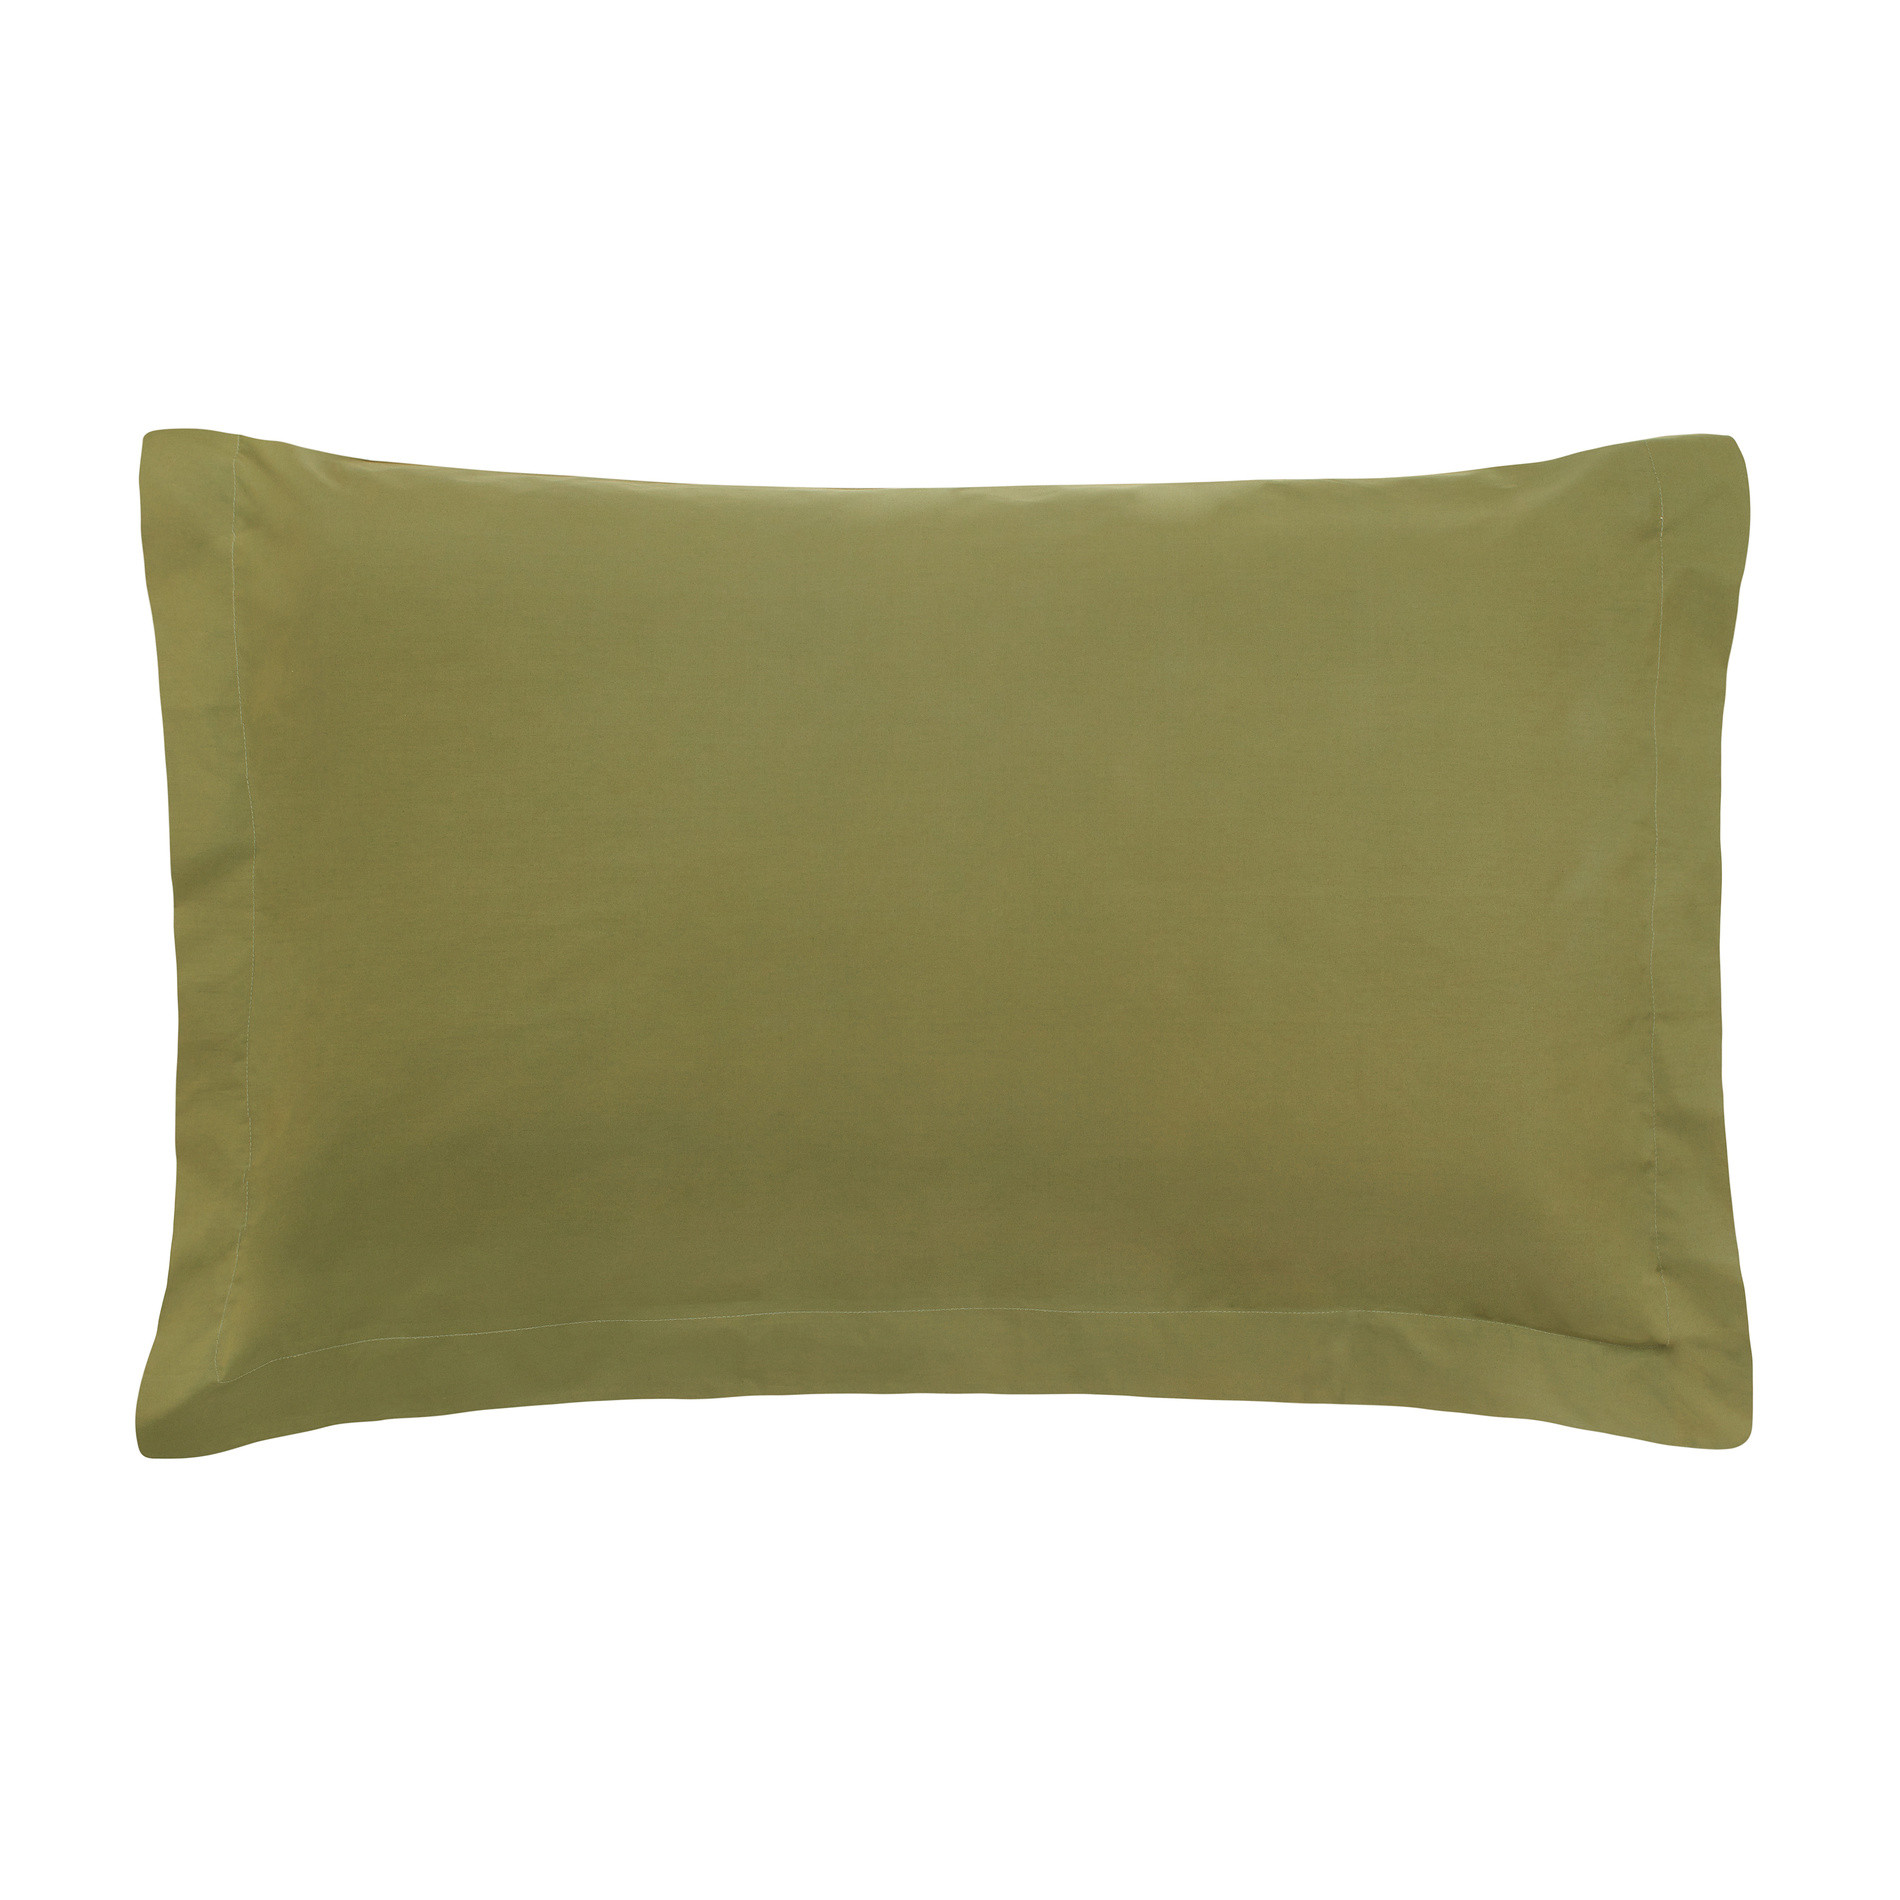 Zefiro solid colour pillowcase in percale., Olive Green, large image number 0